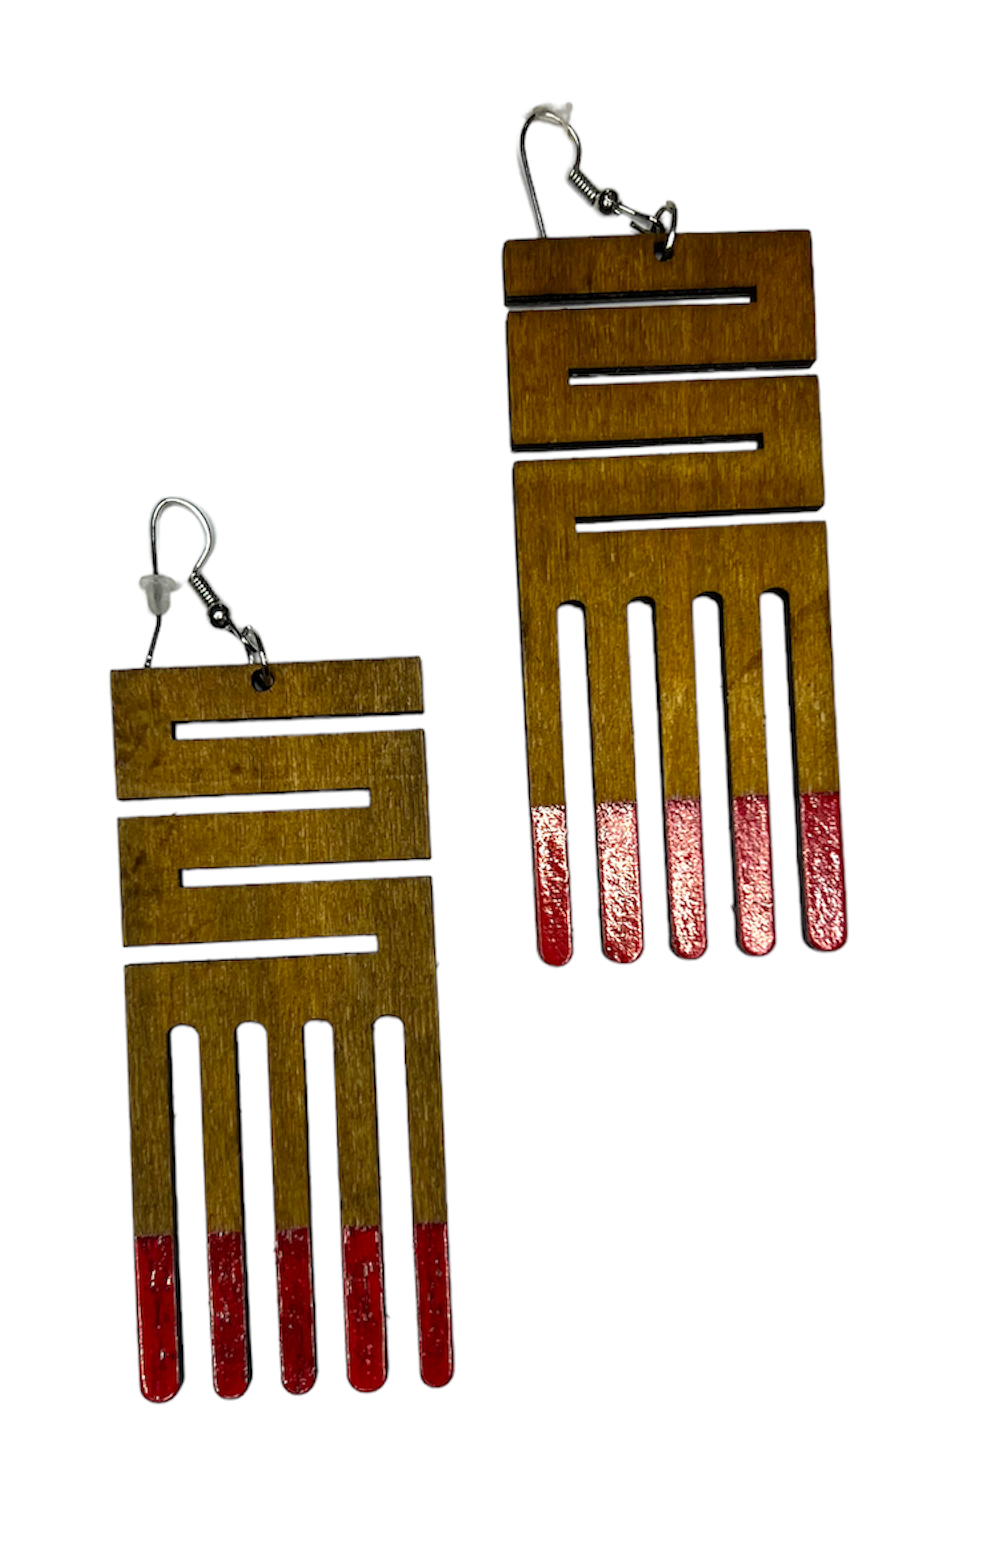 Natural wood dangling afro comb earring with maze-cut handle design and rich red teeth